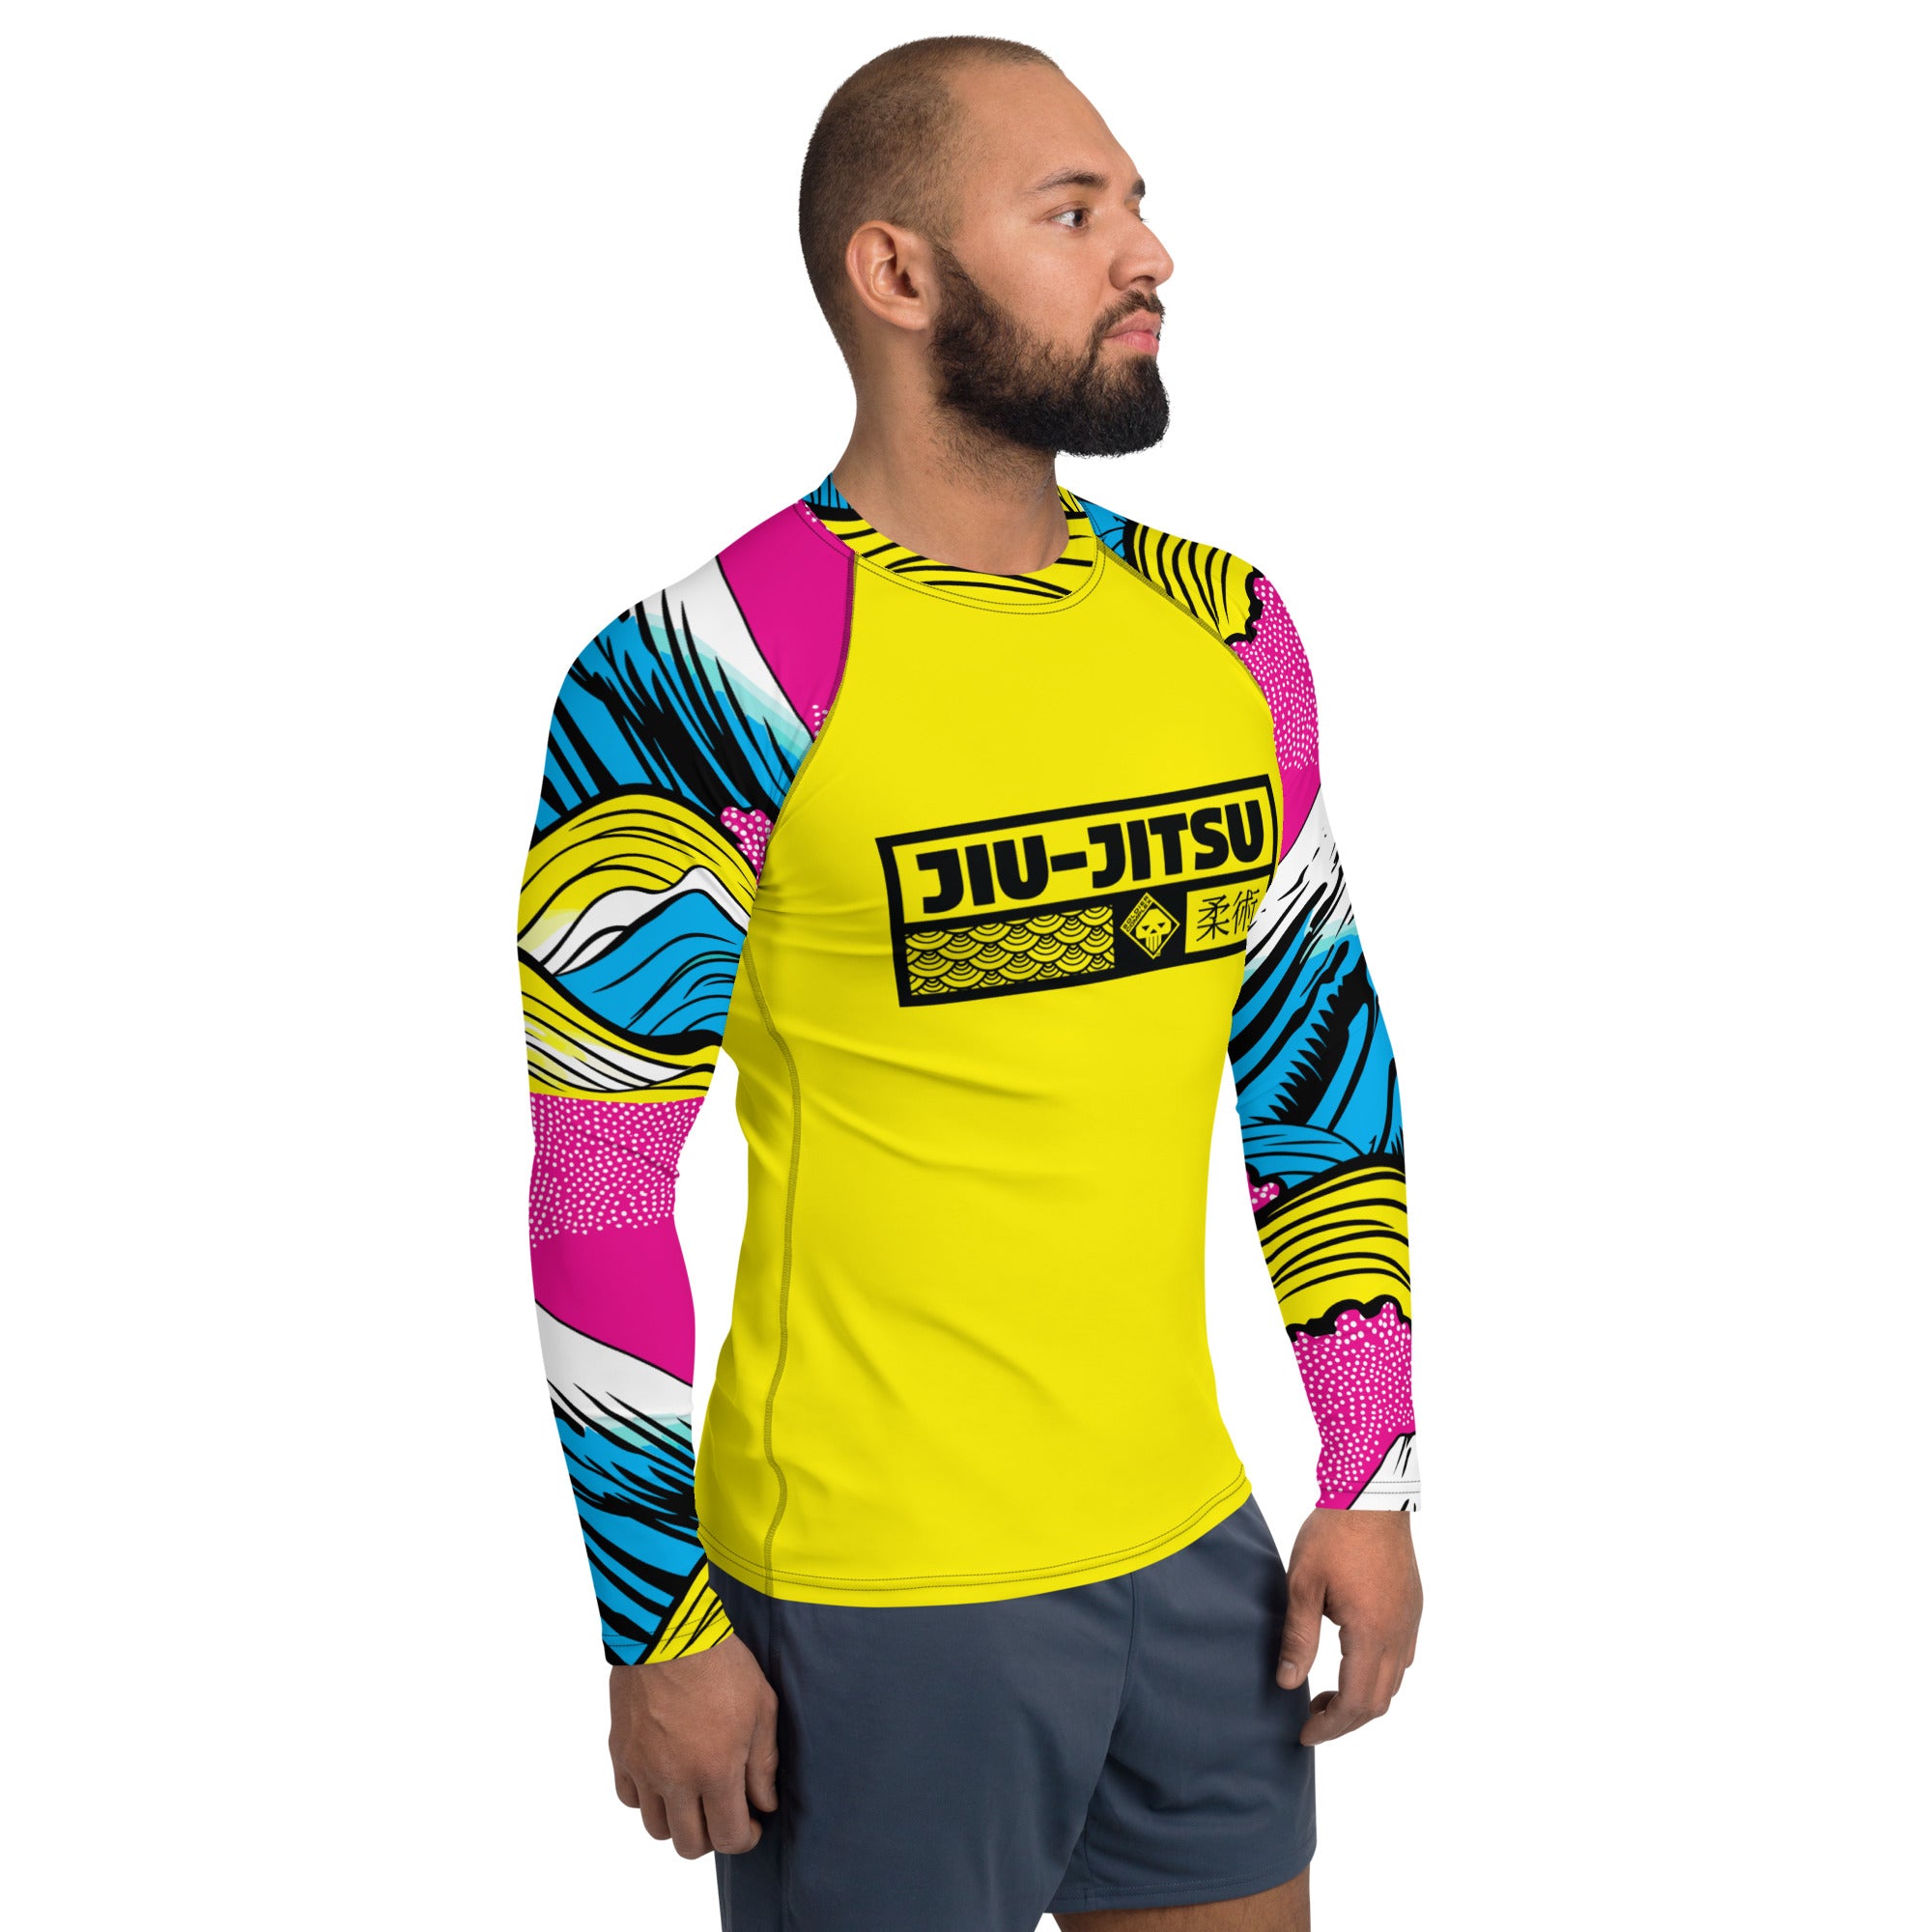 Fuji Sports BJJ Rash Guards: Elevate Performance and Style on the Mats